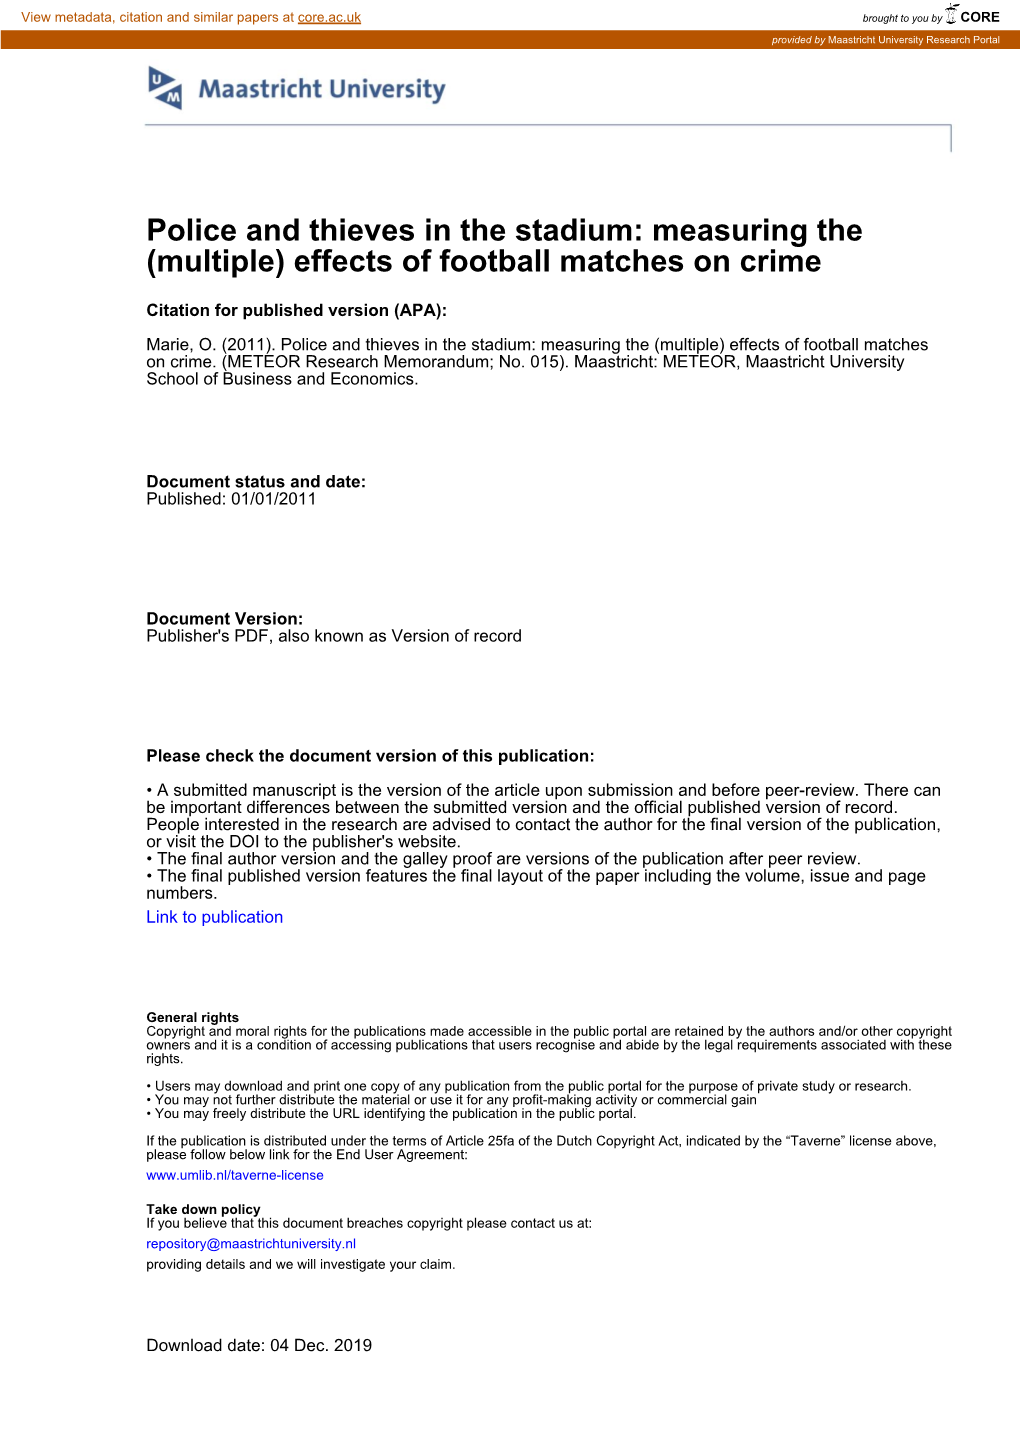 Police and Thieves in the Stadium: Measuring the (Multiple) Effects of Football Matches on Crime